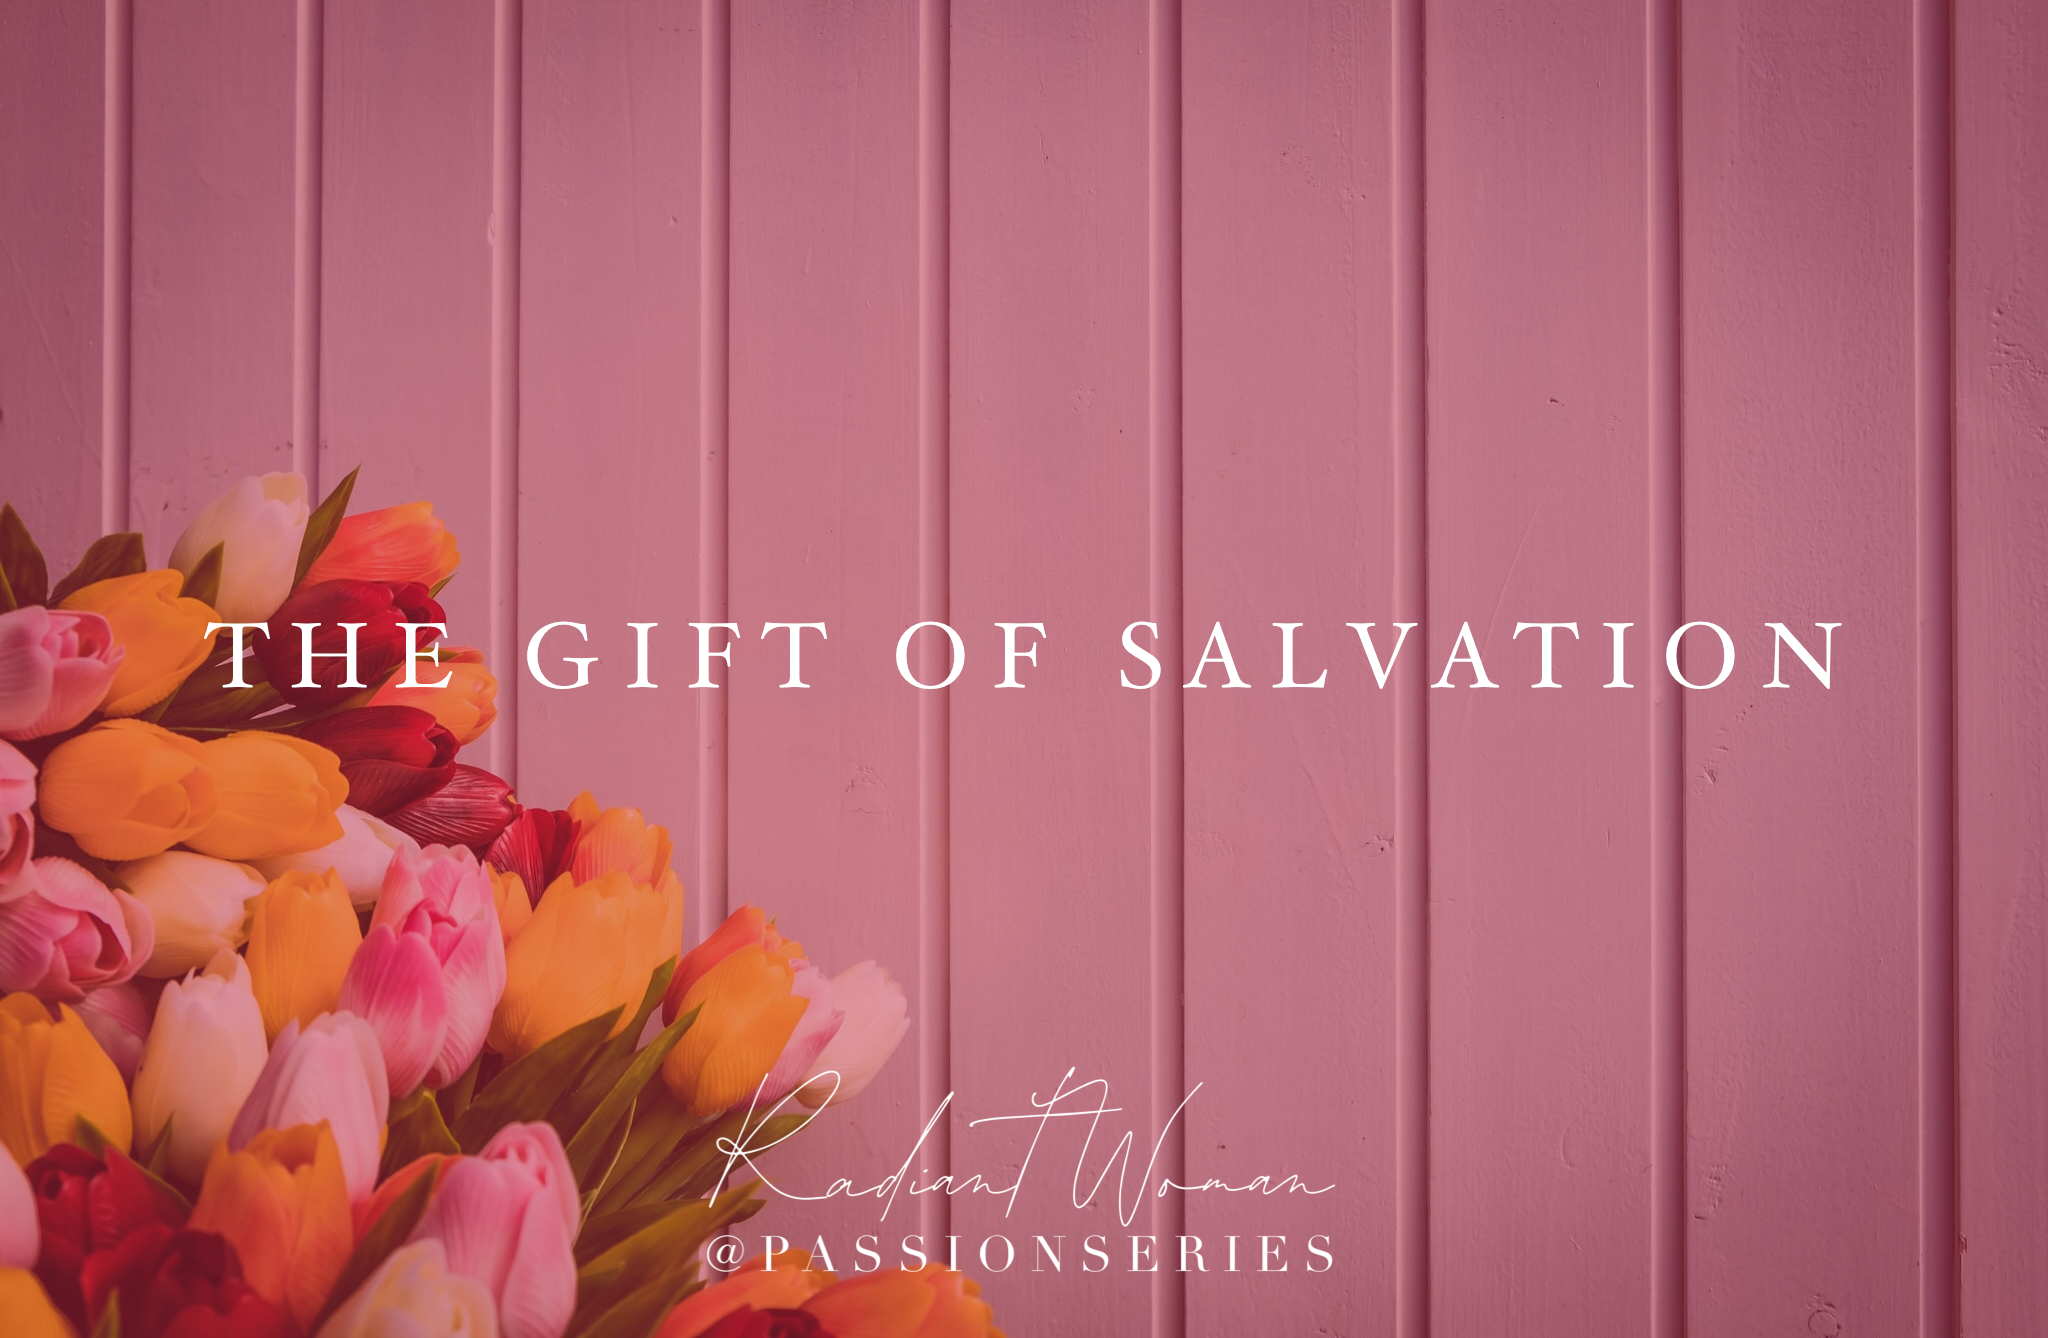 The gift of salvation